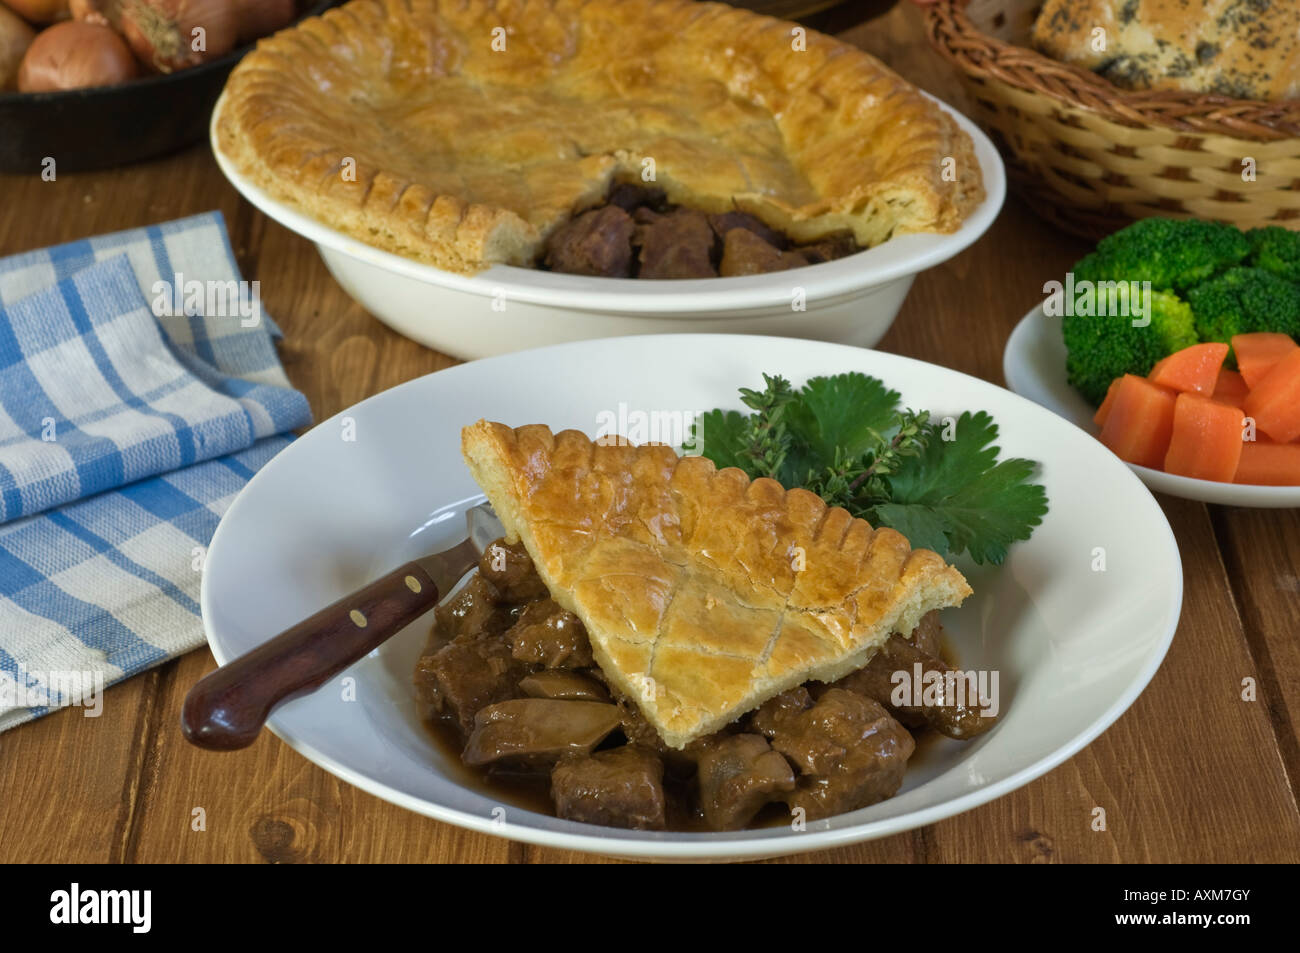 Steak and kidney pie traditionnelle UK Banque D'Images